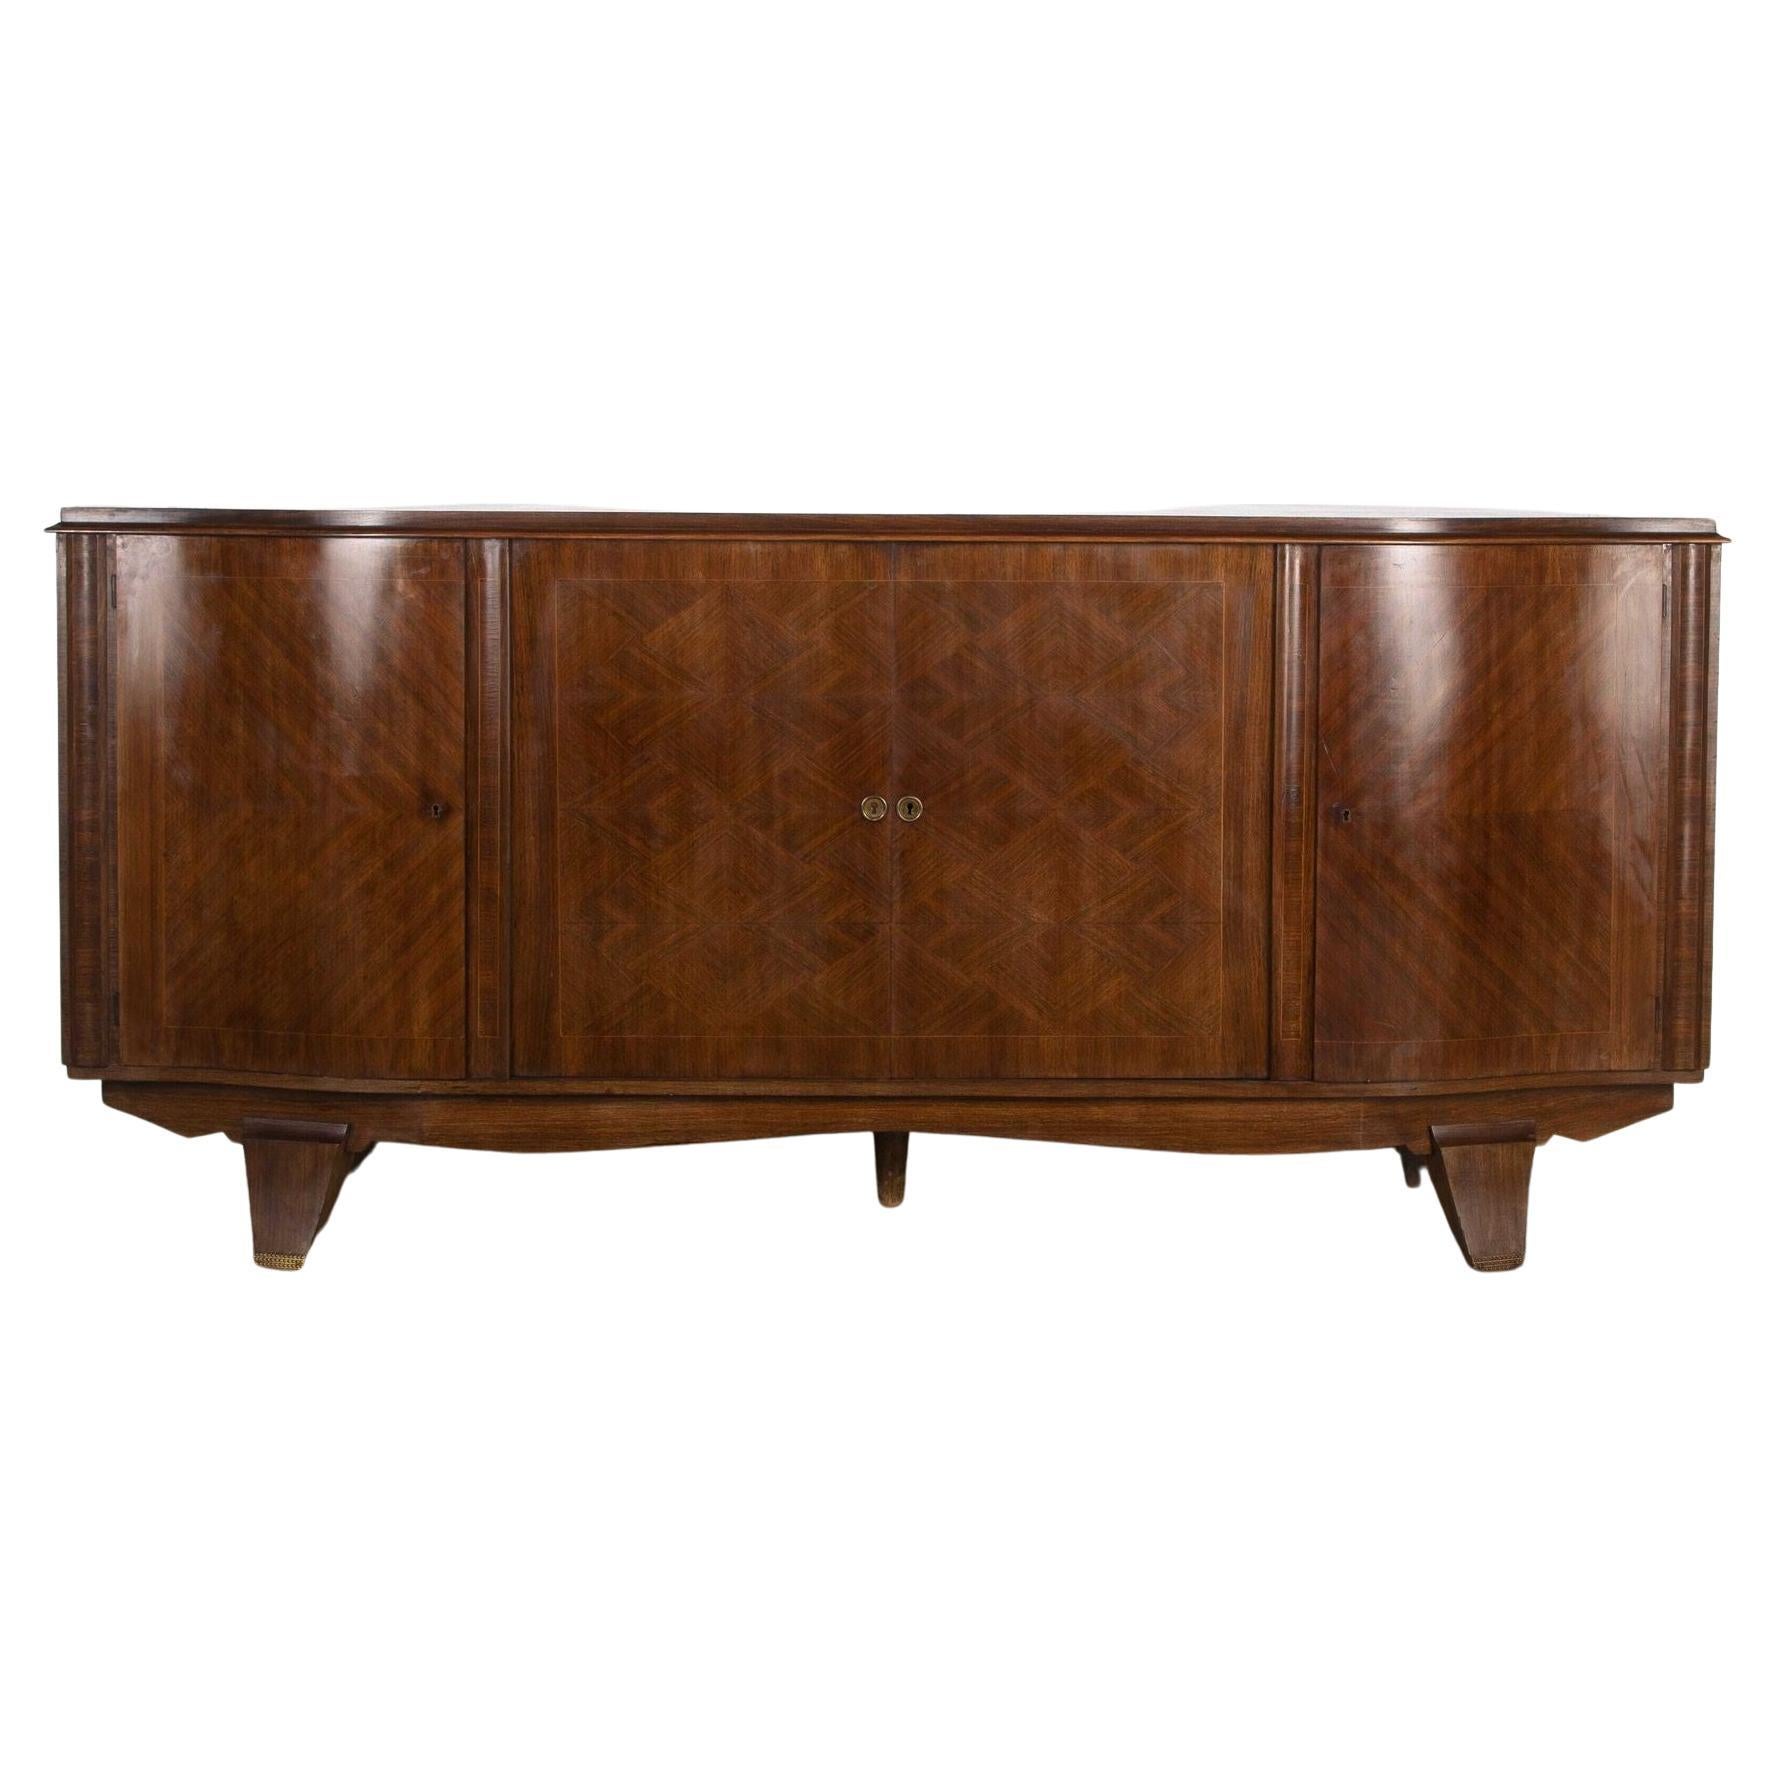 20th Century French Marquetry Sideboard